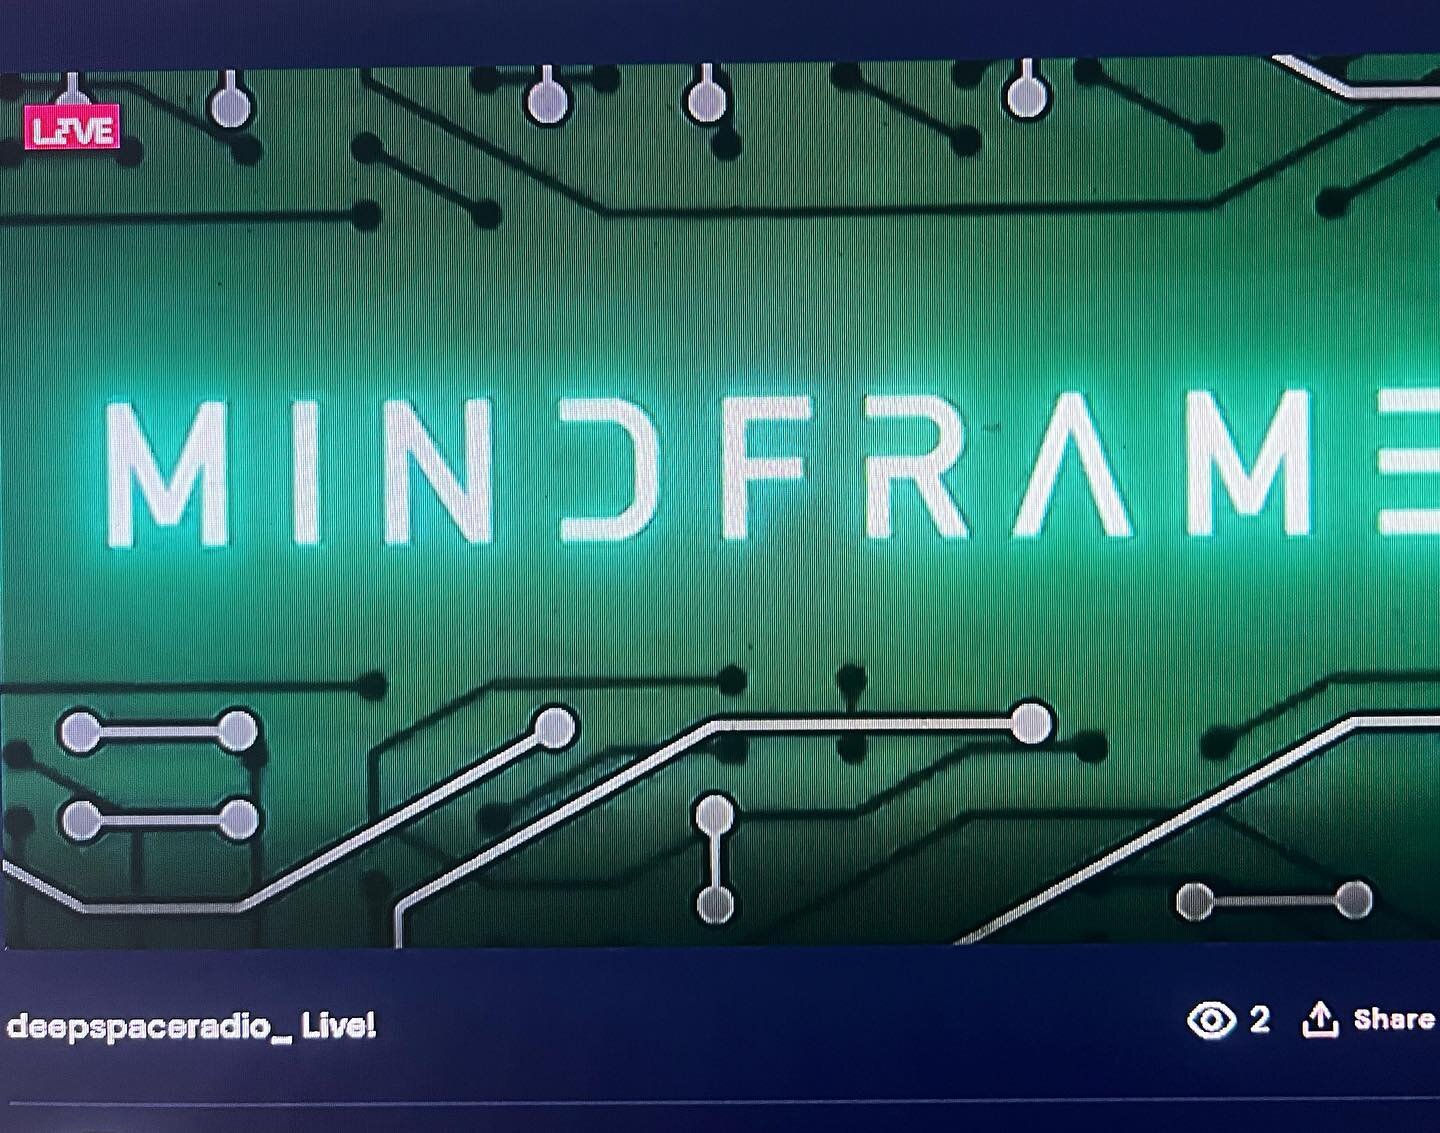 Mindframe all day starting at 12 noon on deepspaceradio - watch the visuals or just listen!!